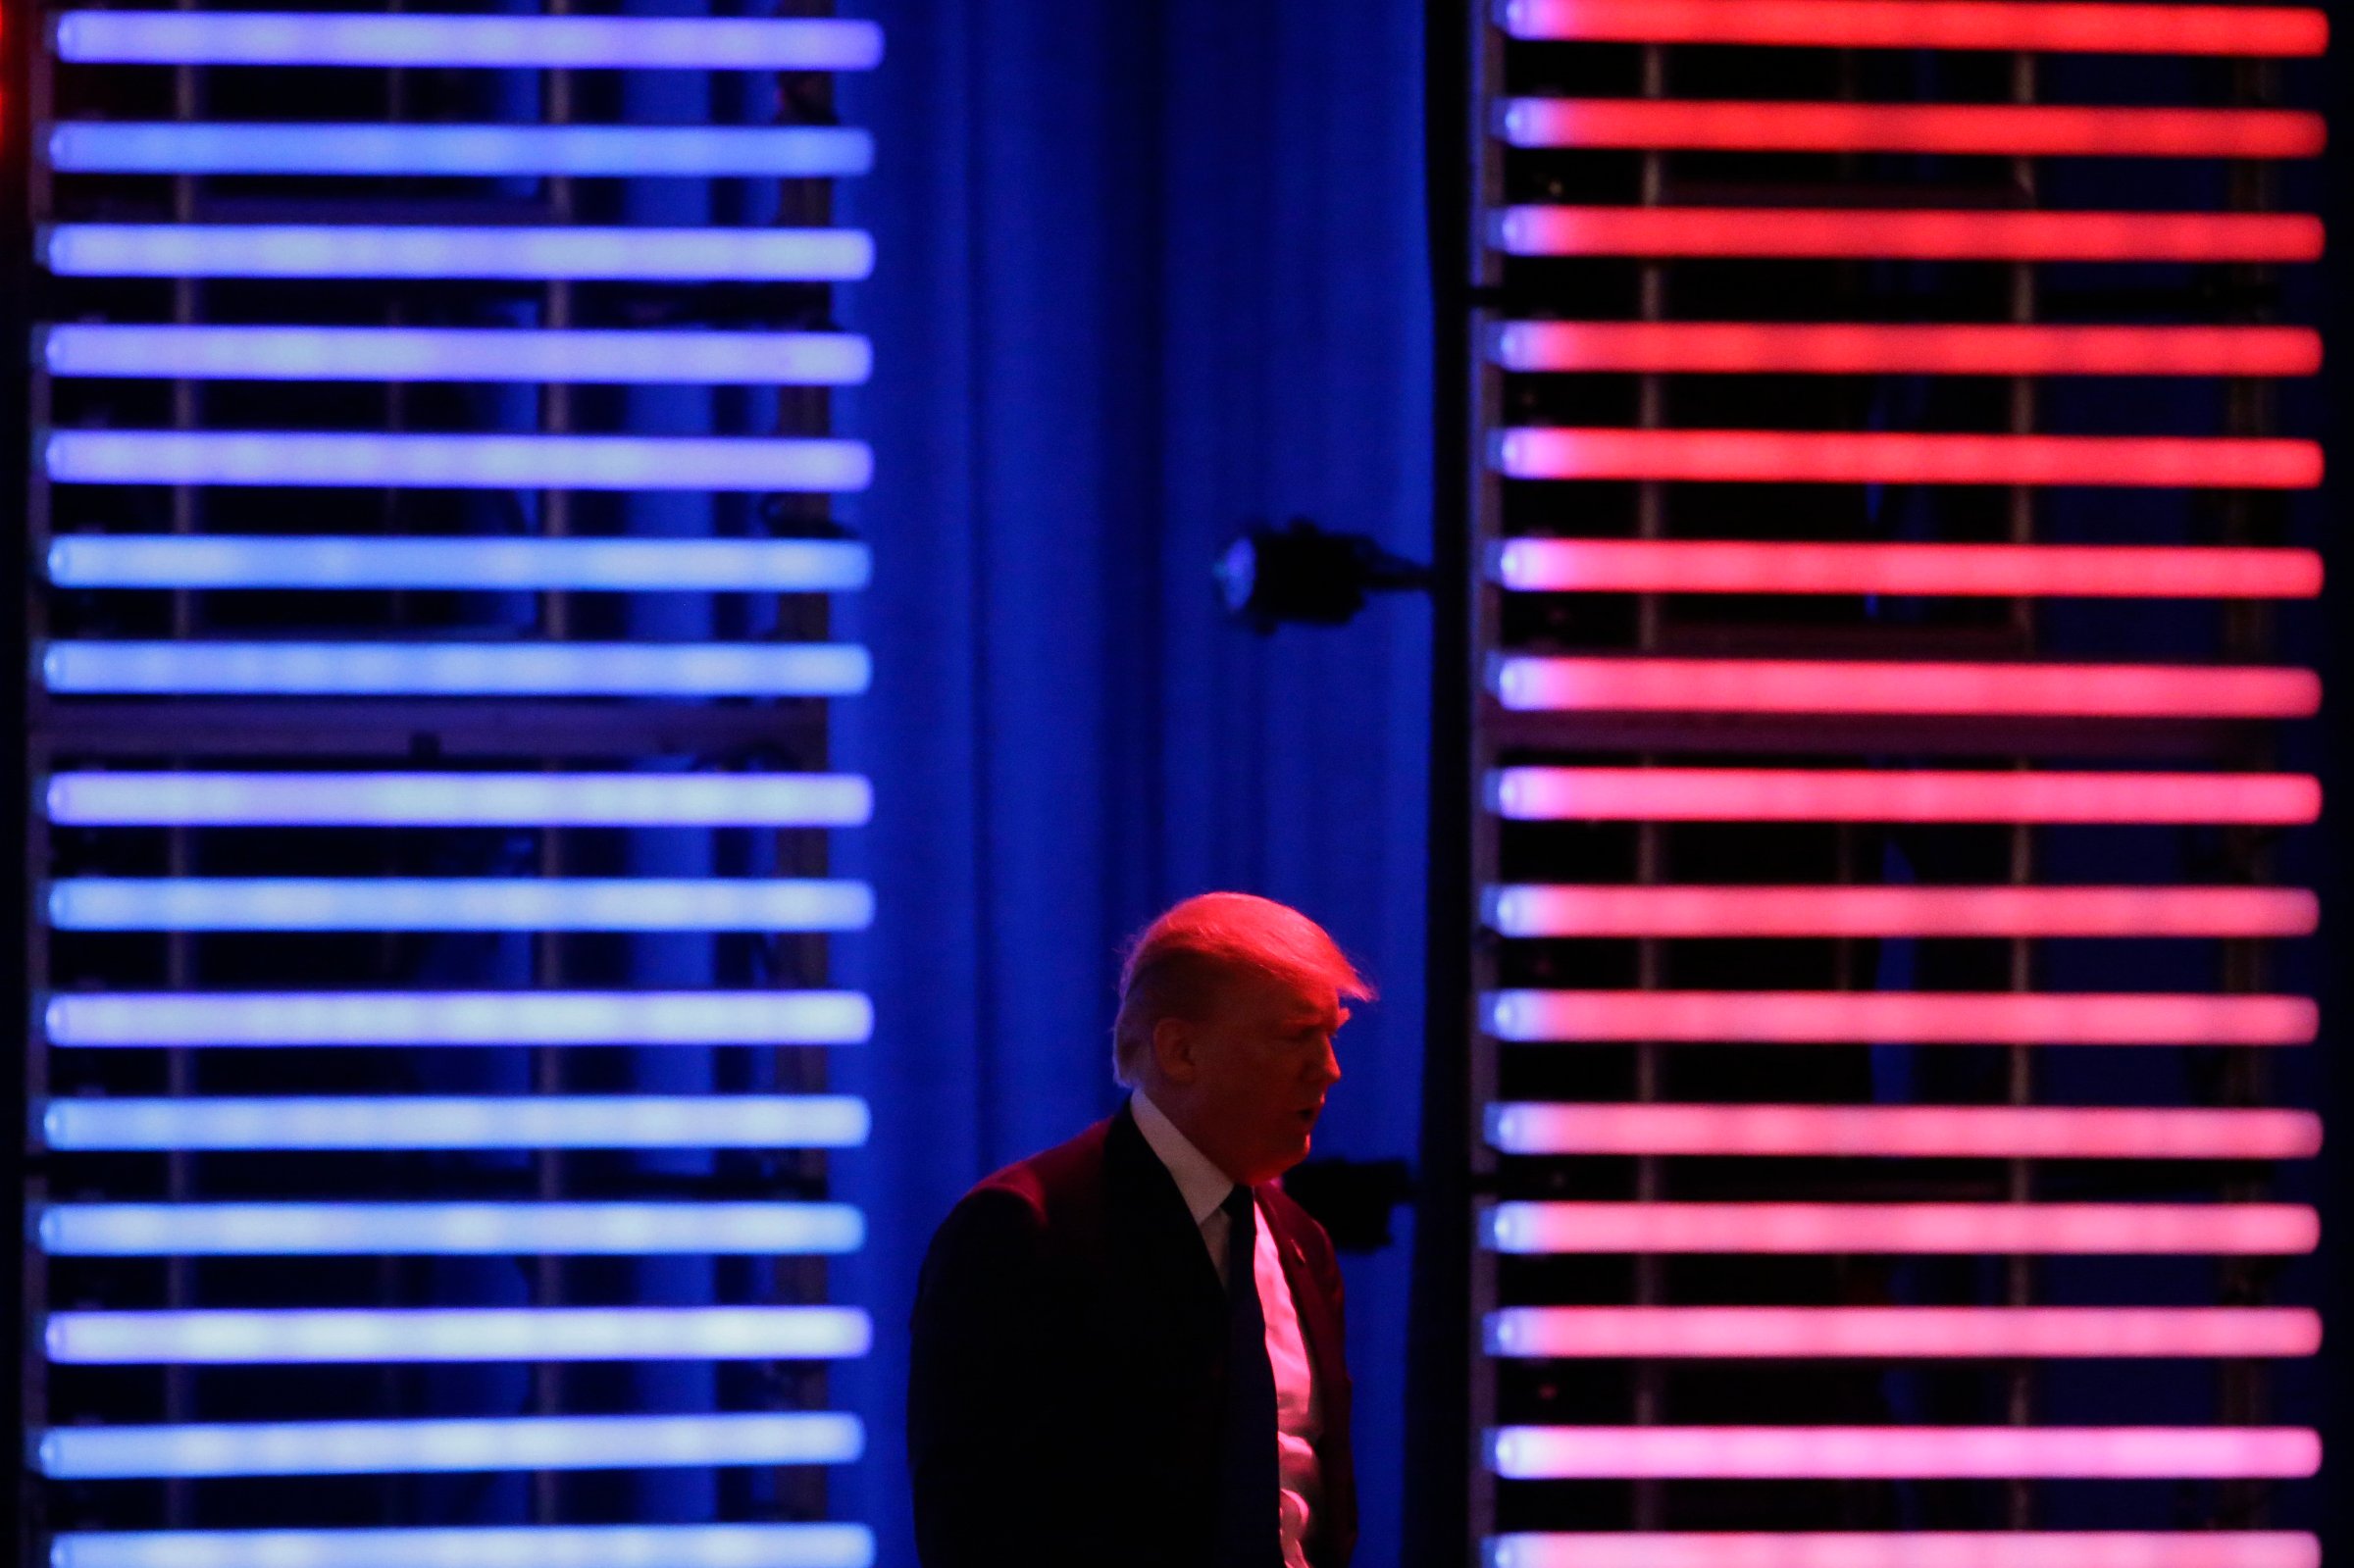 Republican presidential candidate, businessman Donald Trump walks on stage during a Republican presidential primary debate hosted by ABC News at the St. Anselm College on Saturday, Feb. 6, 2016, in Manchester, N.H.